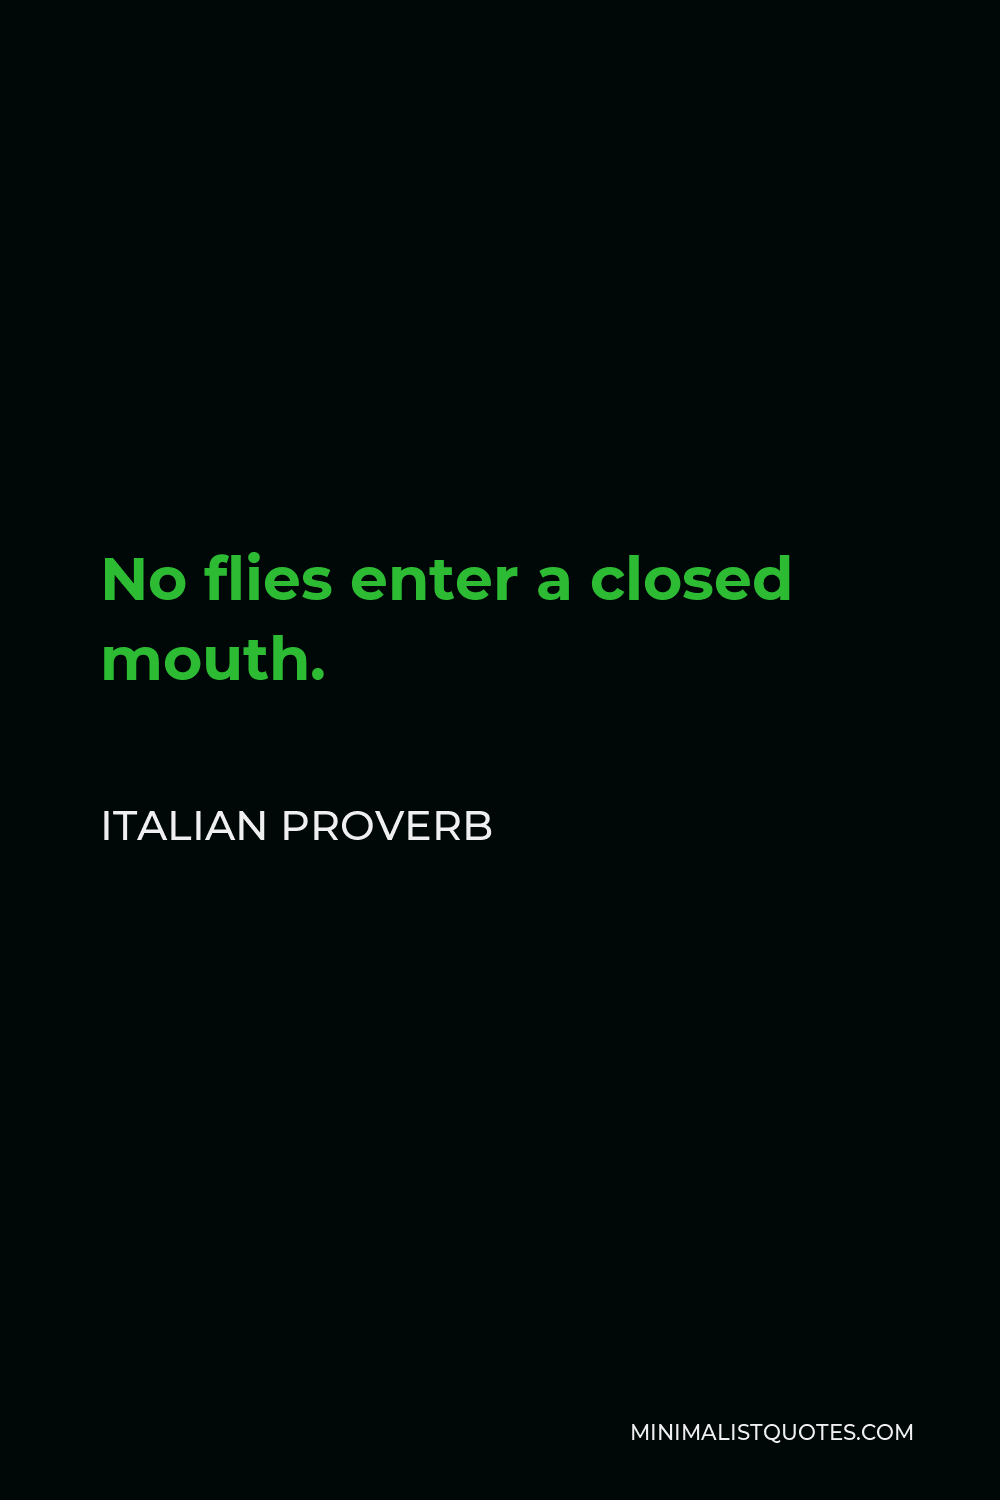 Italian Proverb Quote - No flies enter a closed mouth.